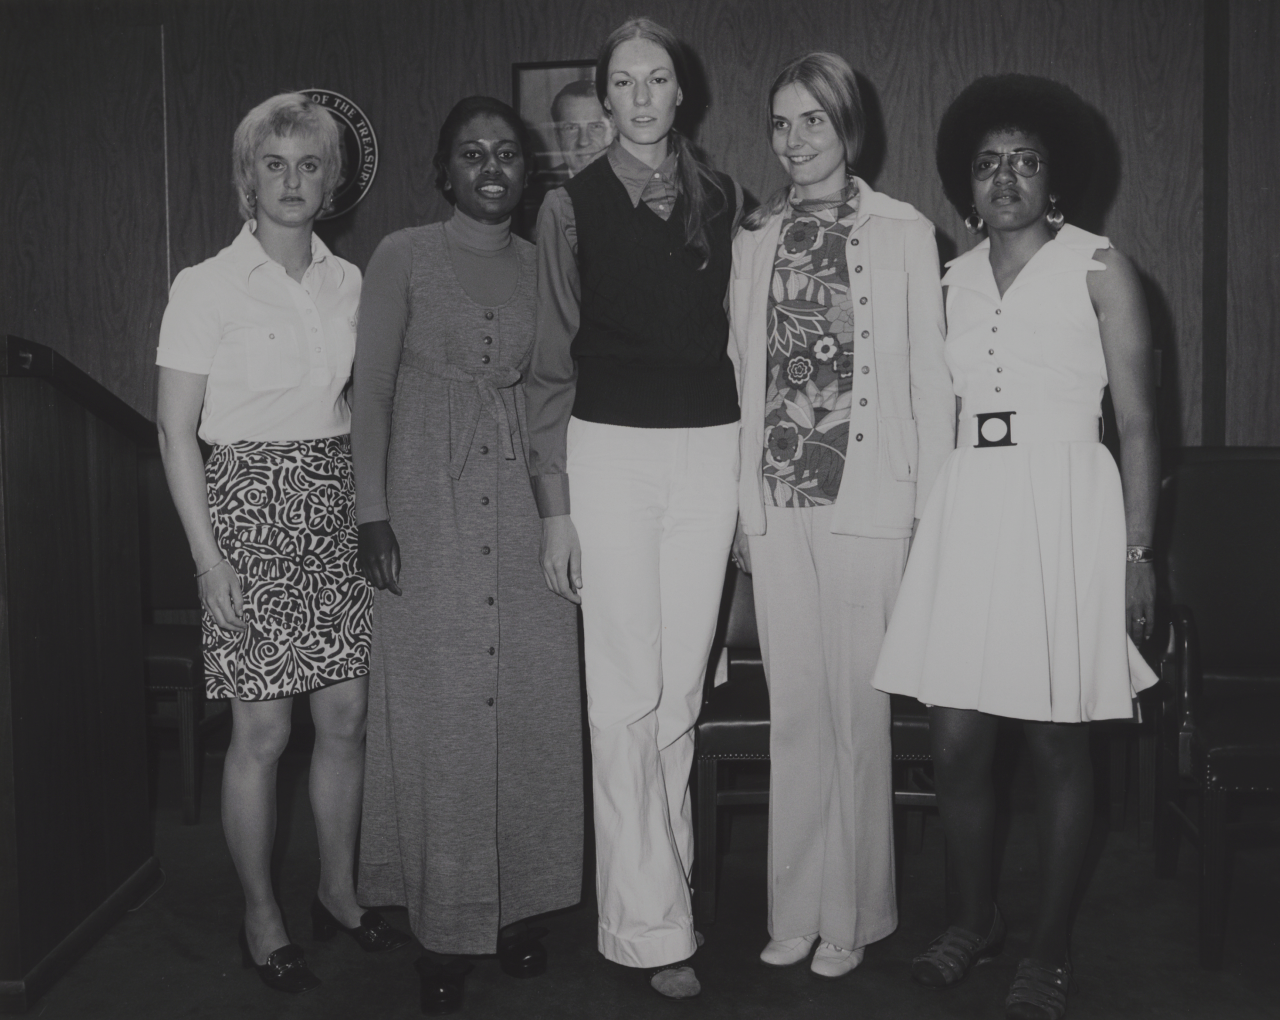 Three white and two Black women wearing civilian clothes stand in a line posing for the photo.